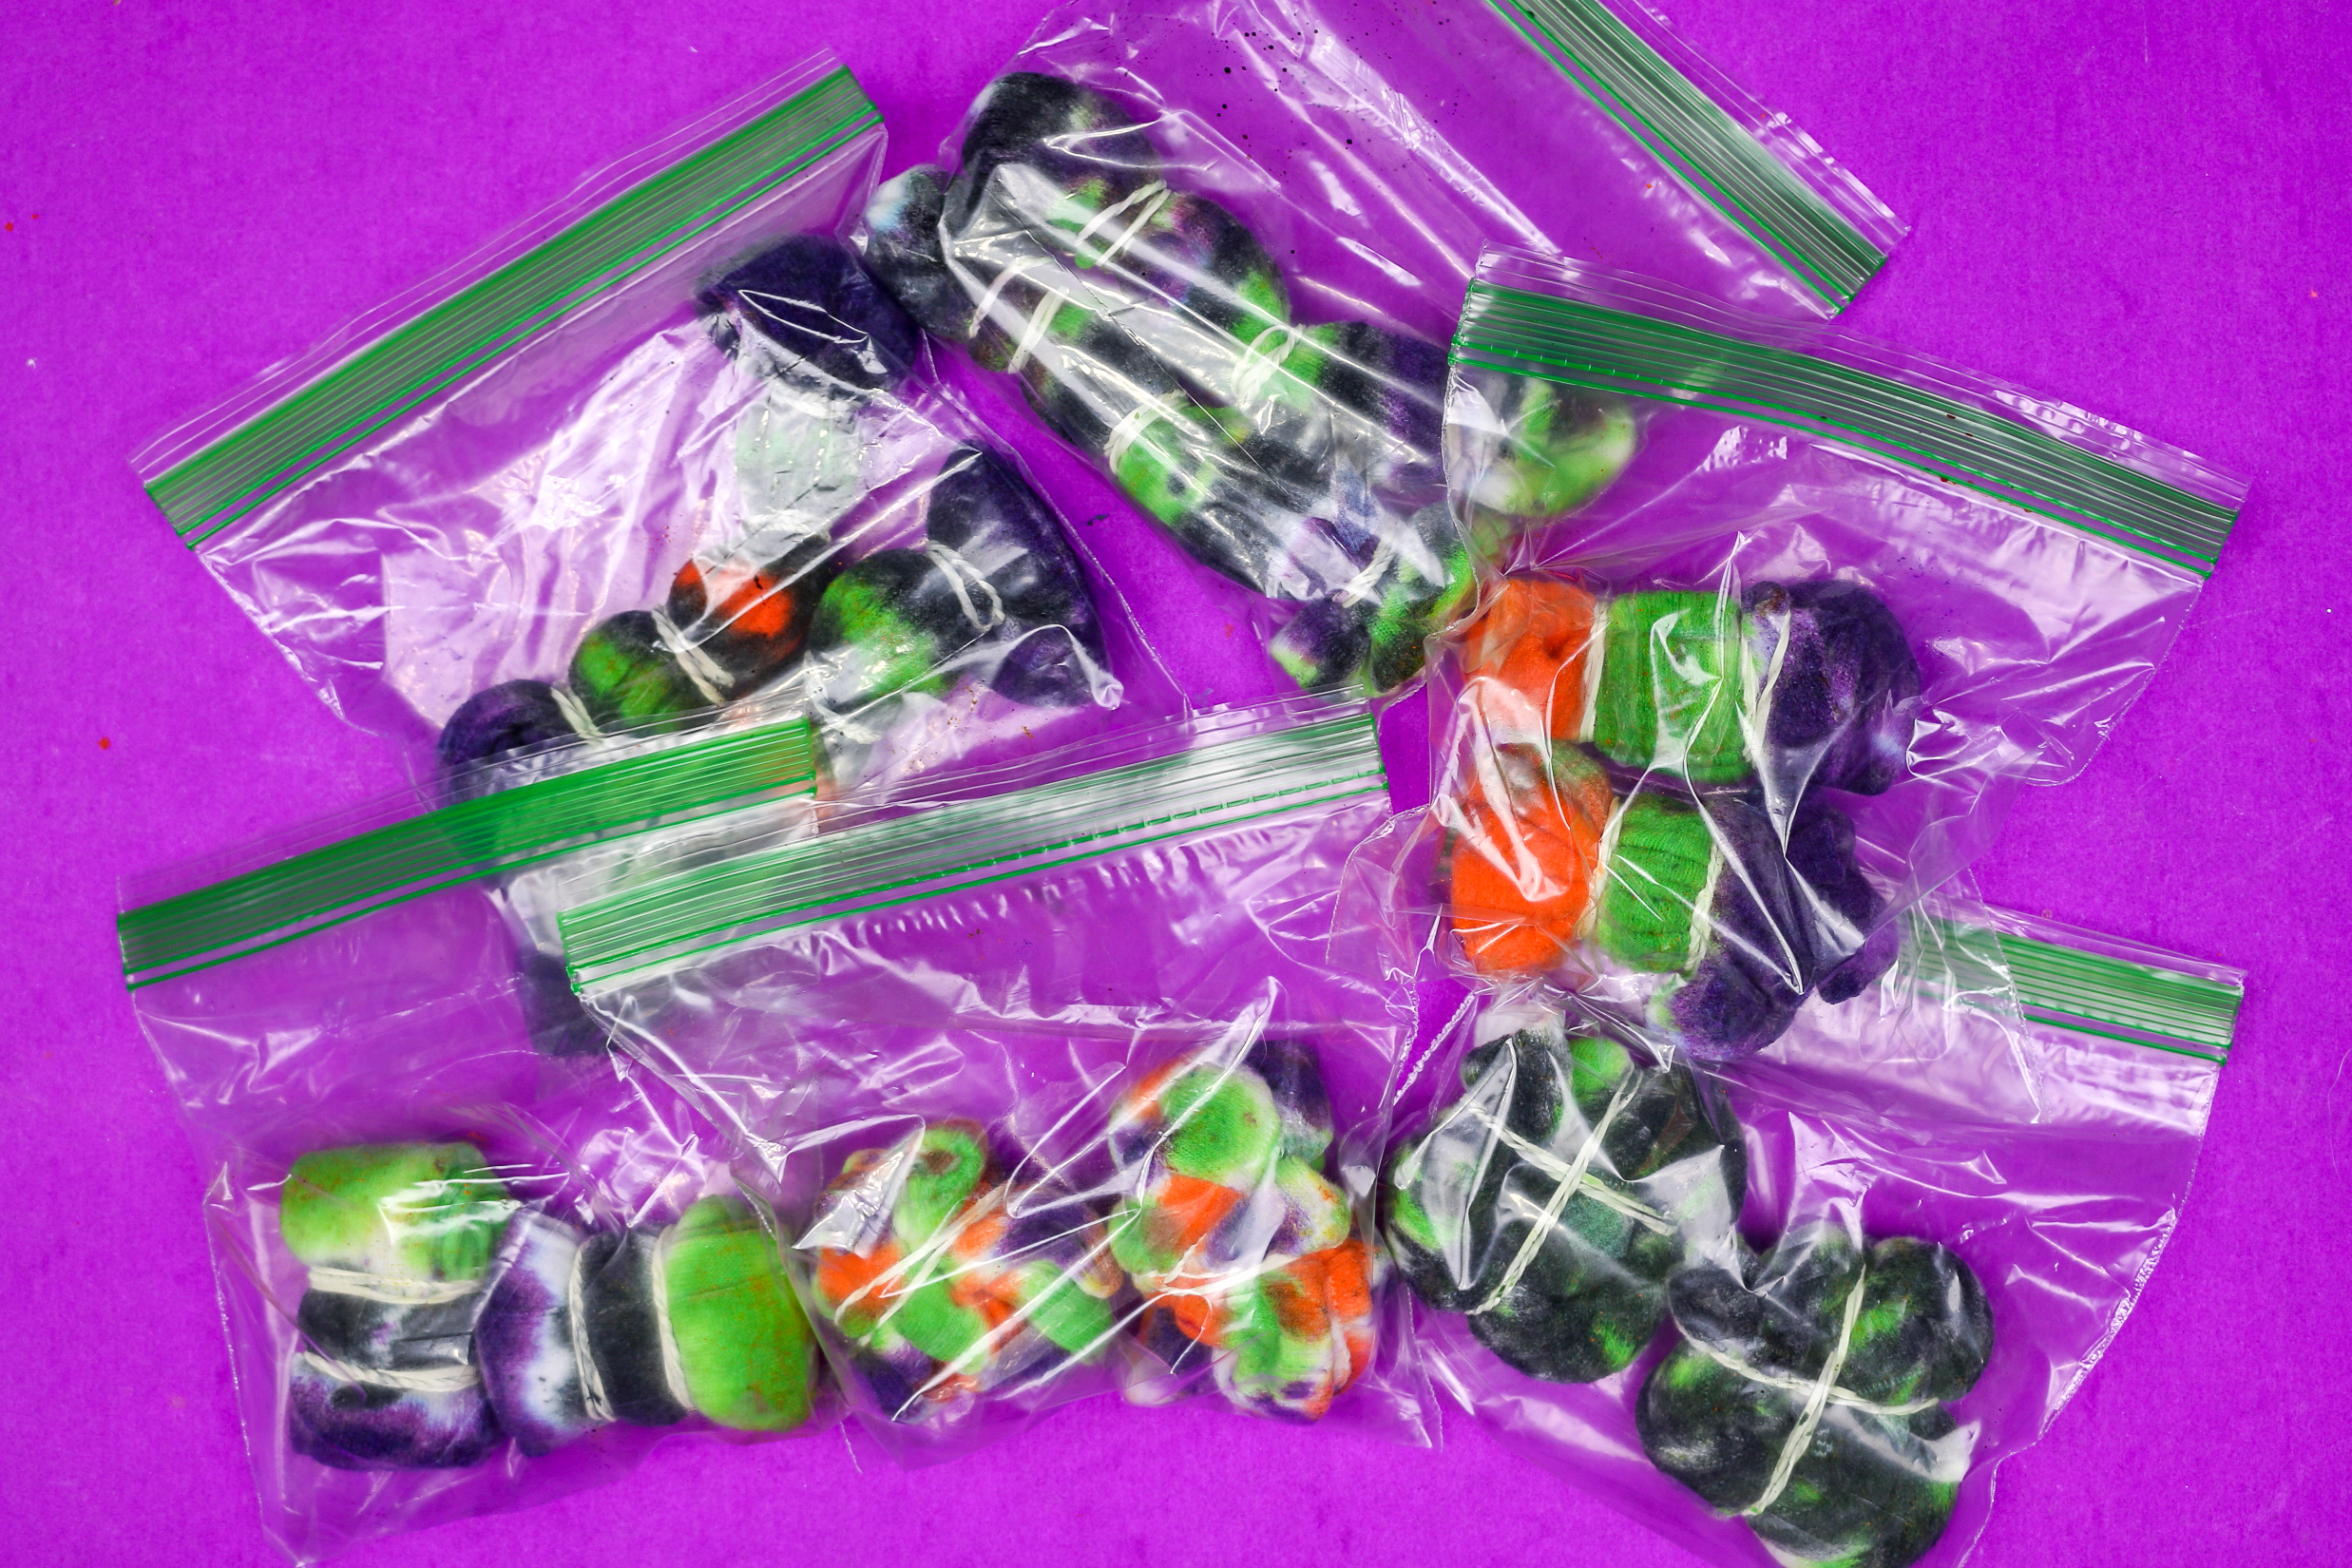 zipper food bags with wet tie dyed socks